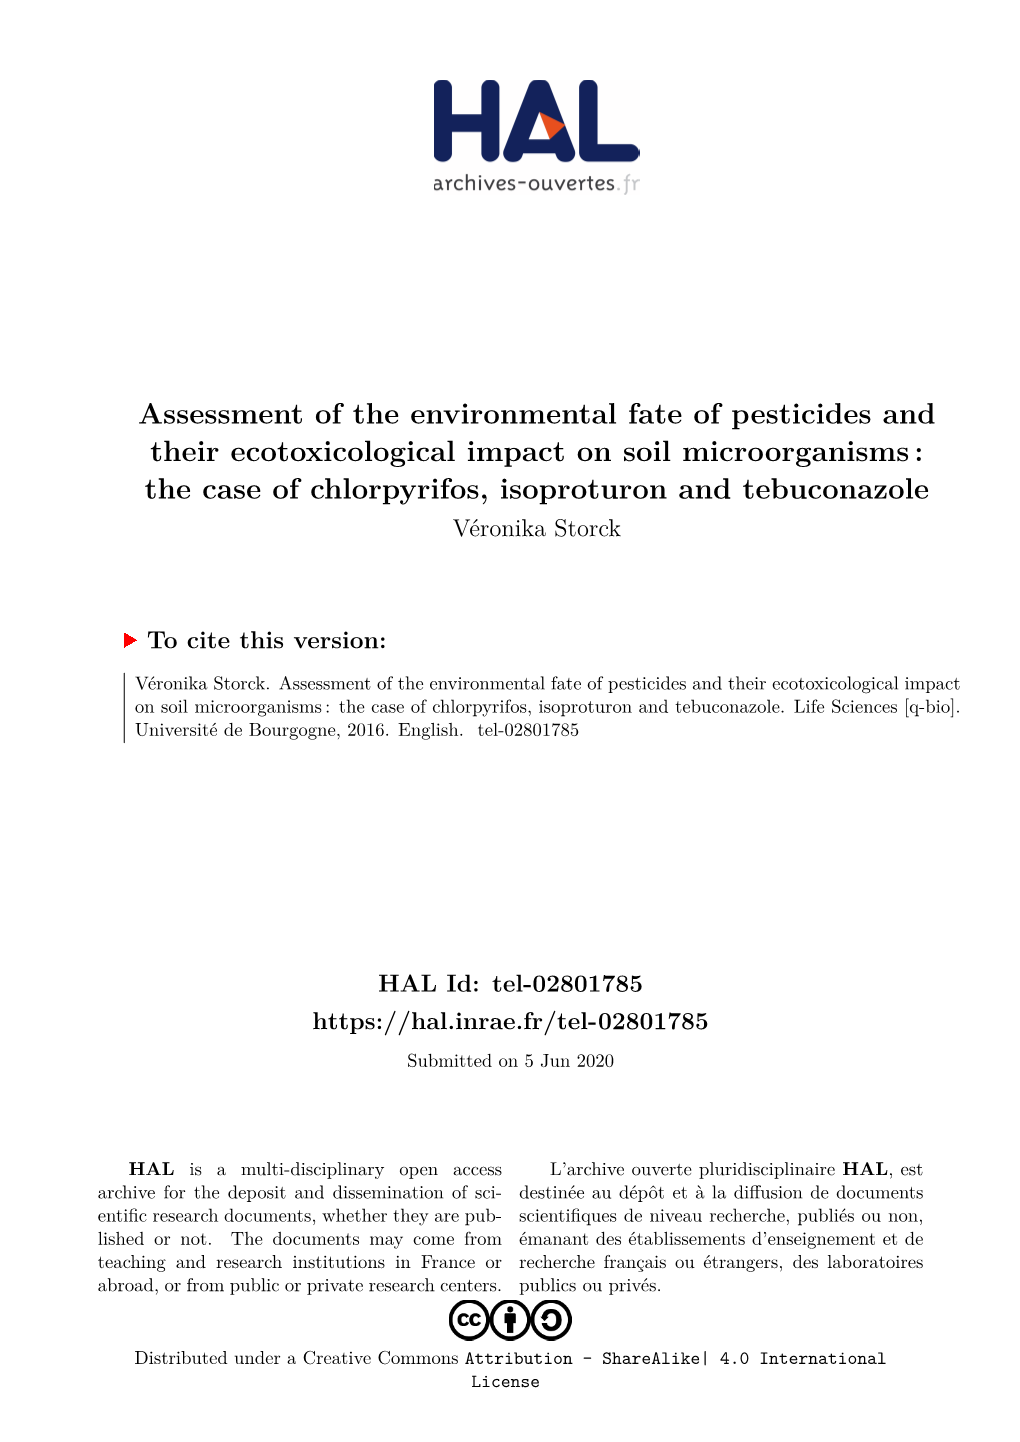 Assessment of the Environmental Fate of Pesticides and Their